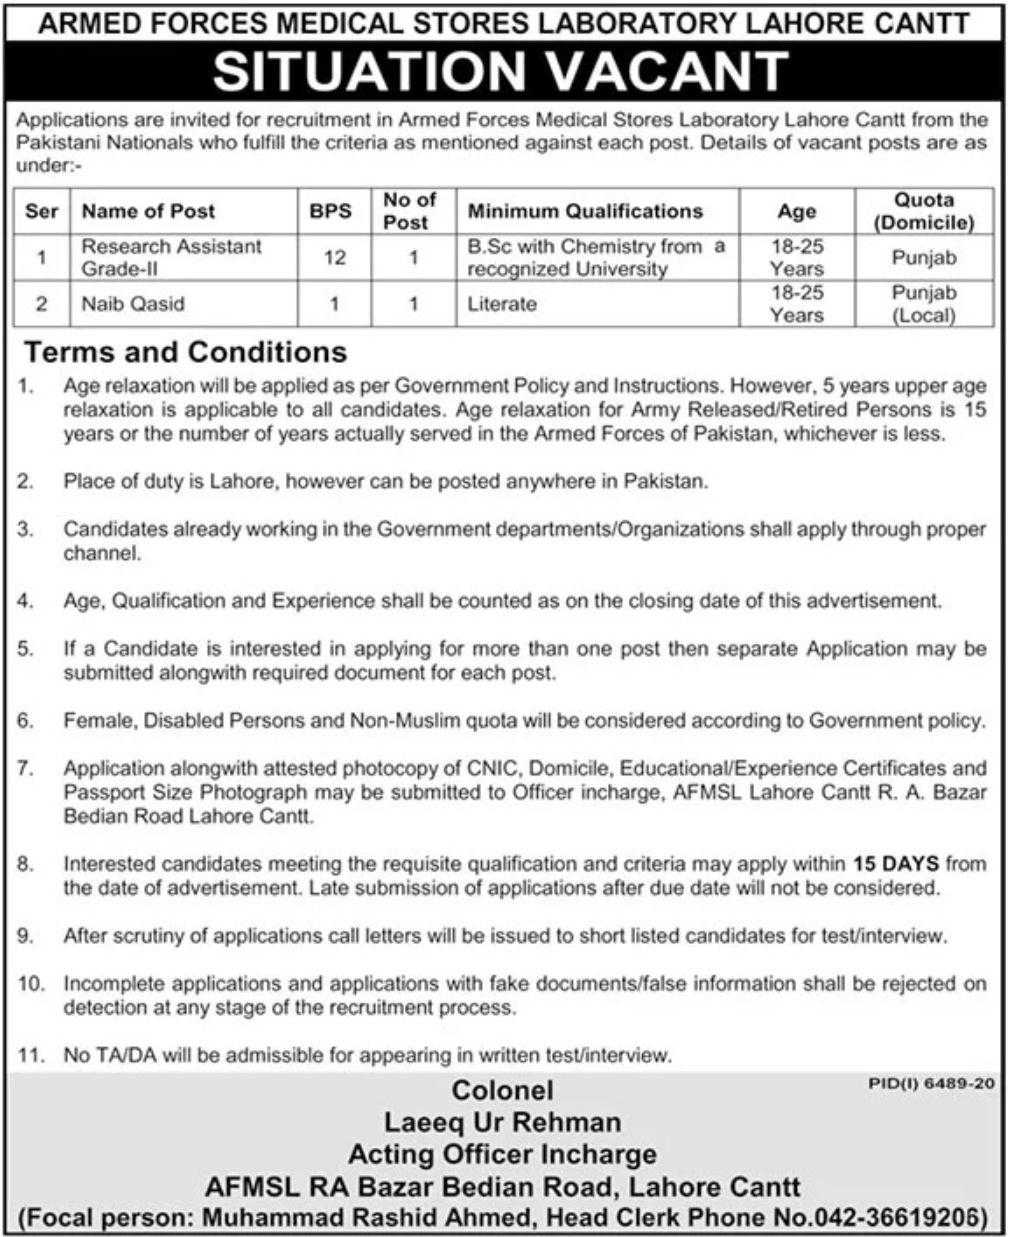 Occupational therapy jobs in pakistan army